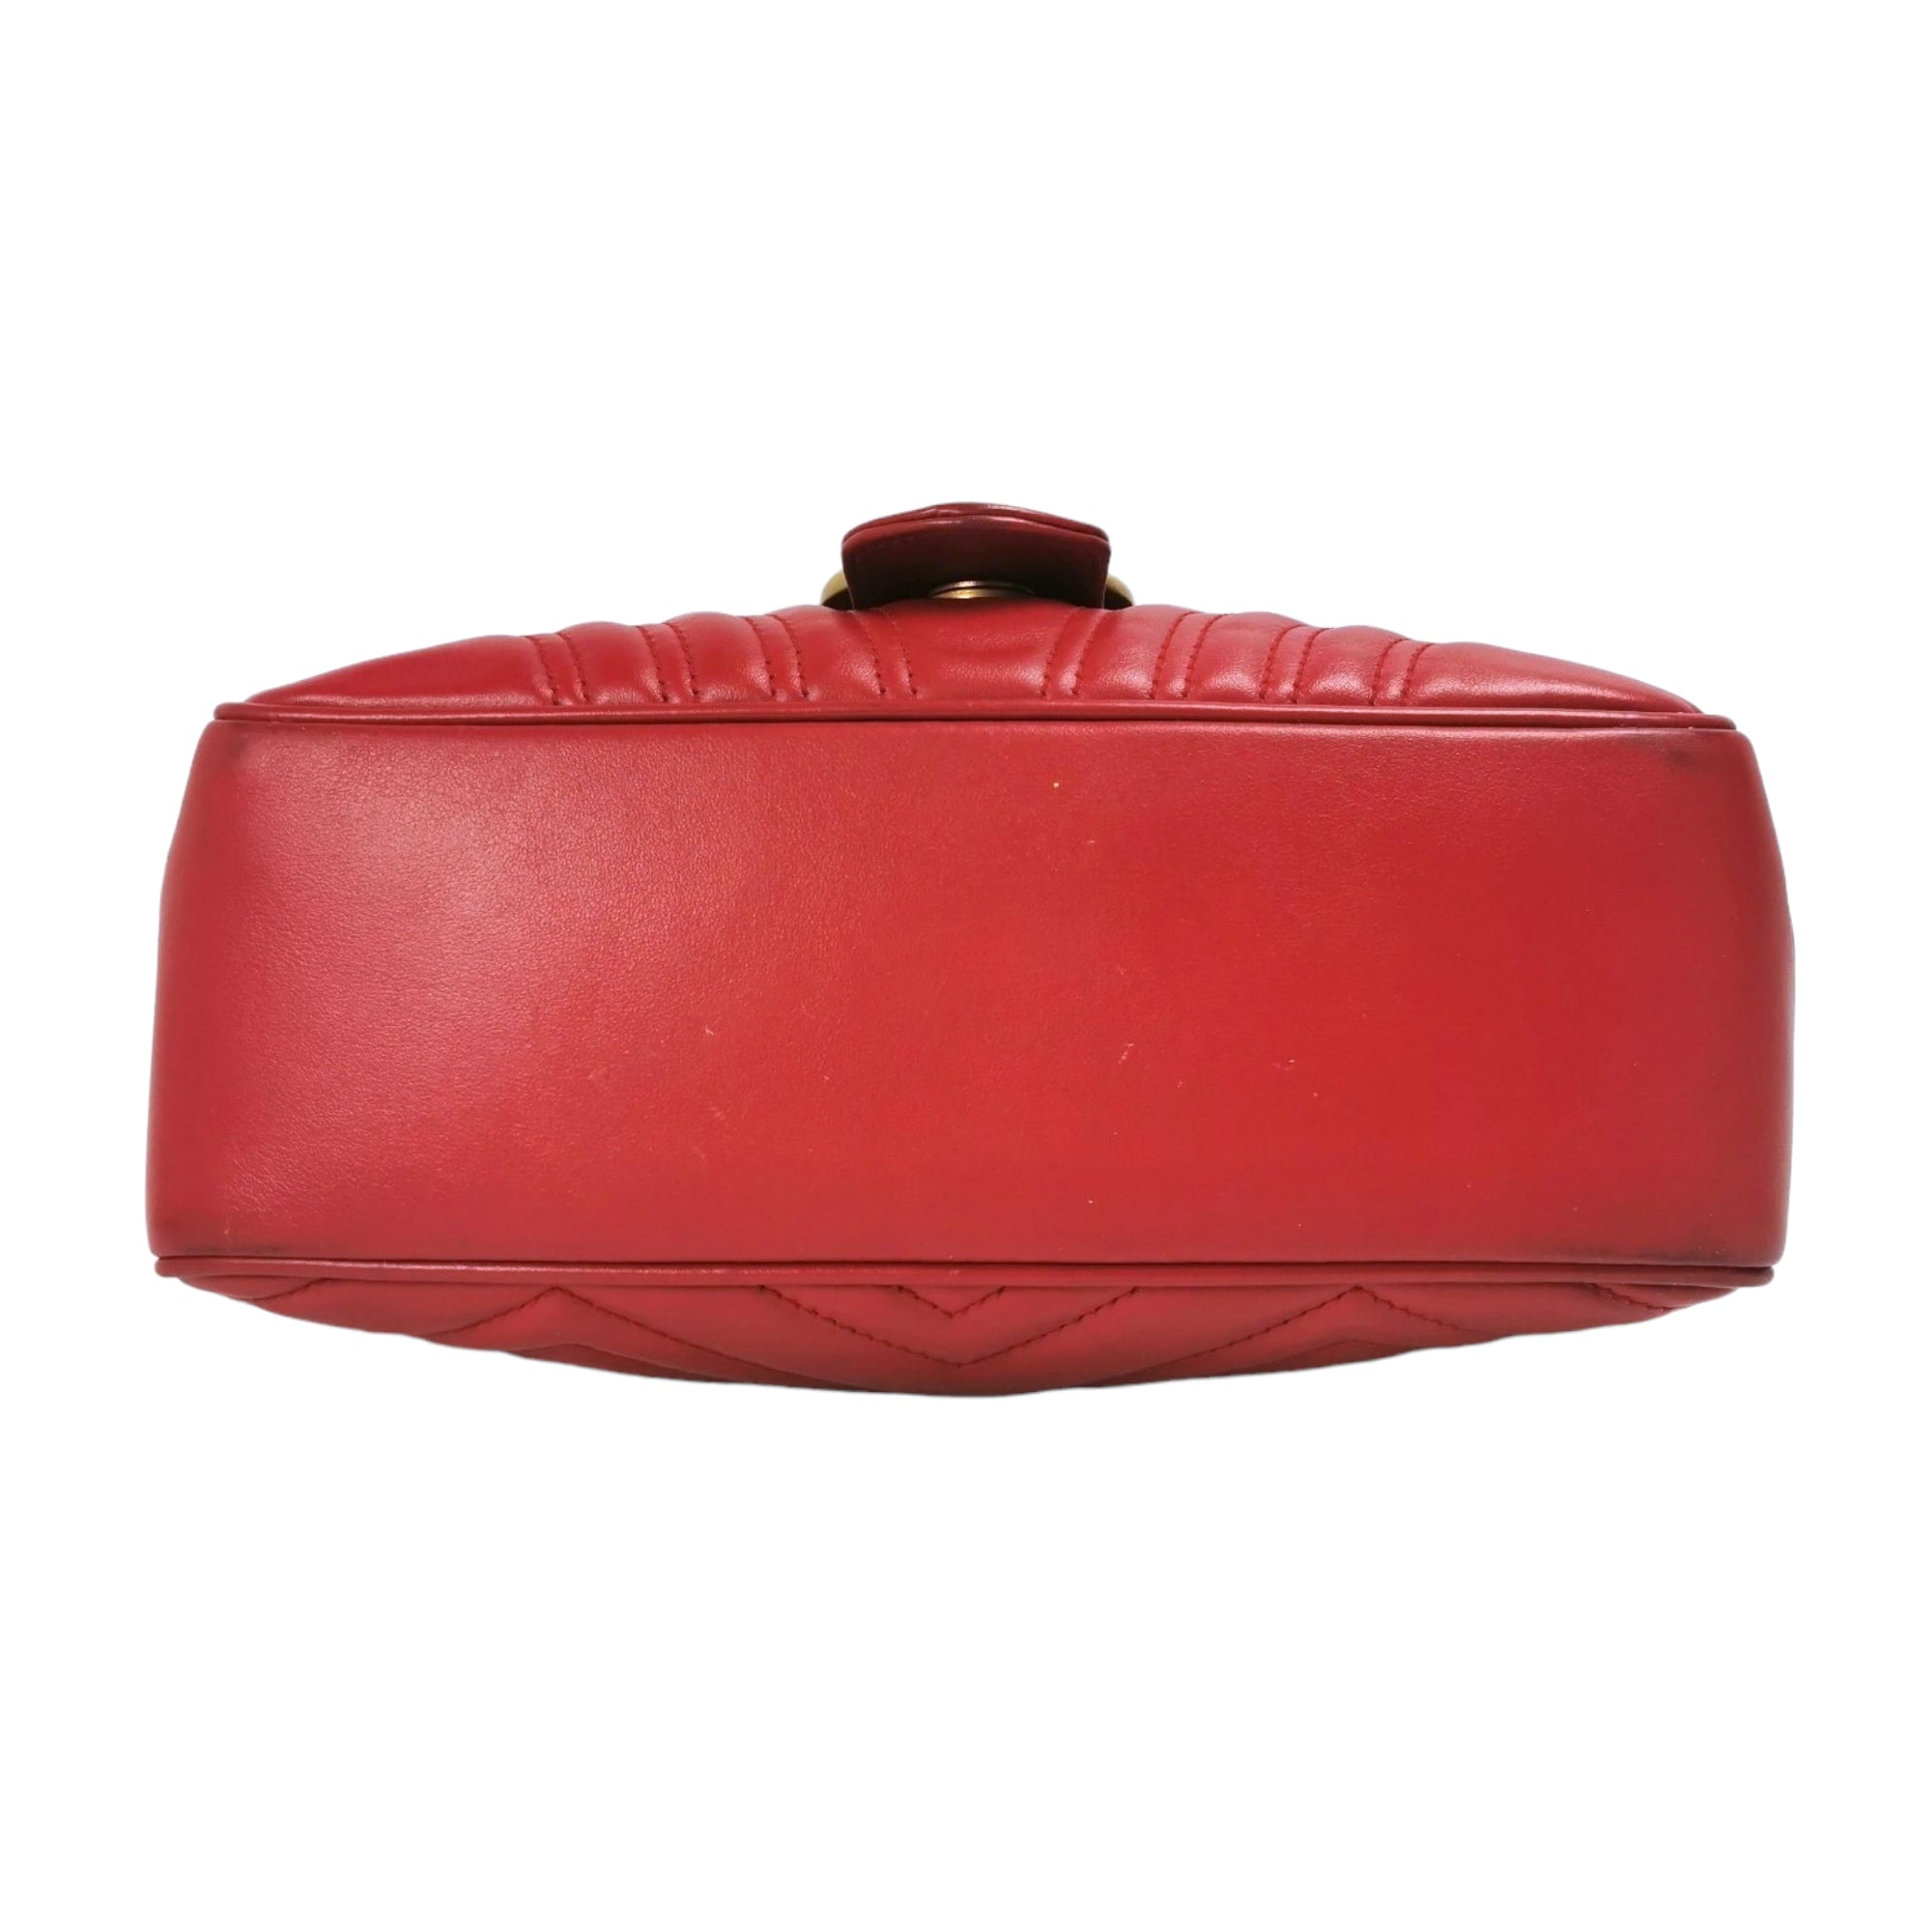 Gucci Marmont Top Pandle Small Red Calfskin